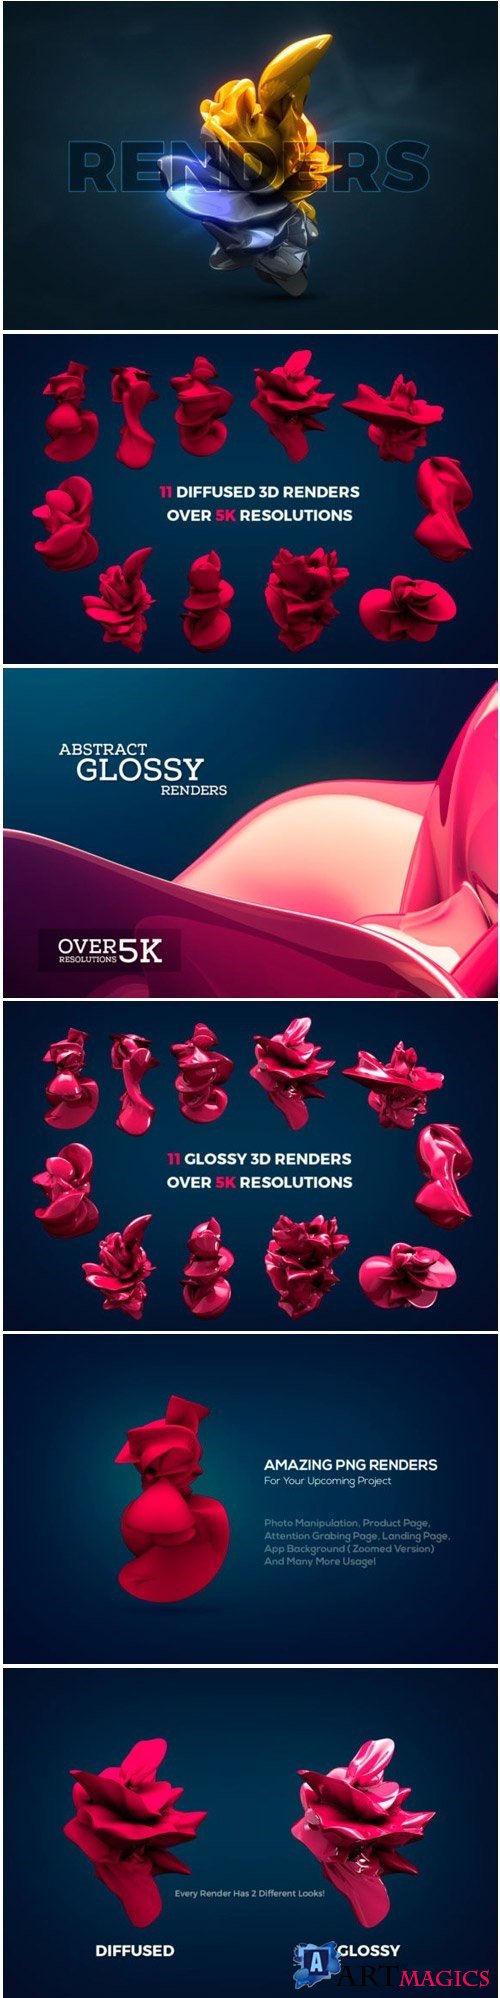 Abstract Glossy 3D Renders - 509980